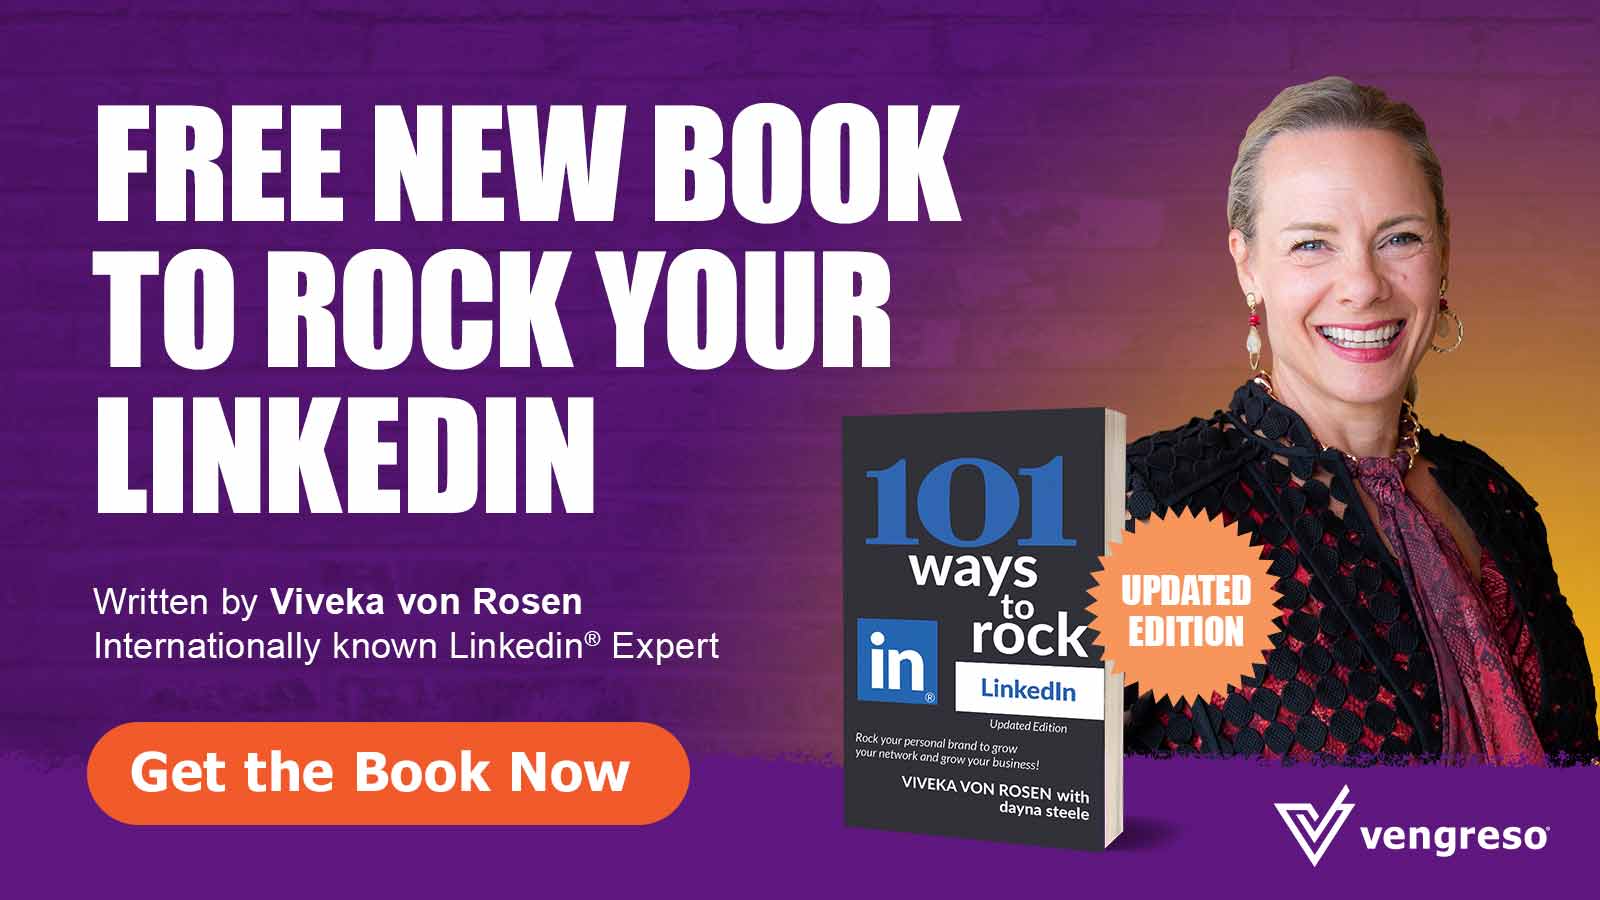 Download this free book! 101 Ways to Rock LinkedIn